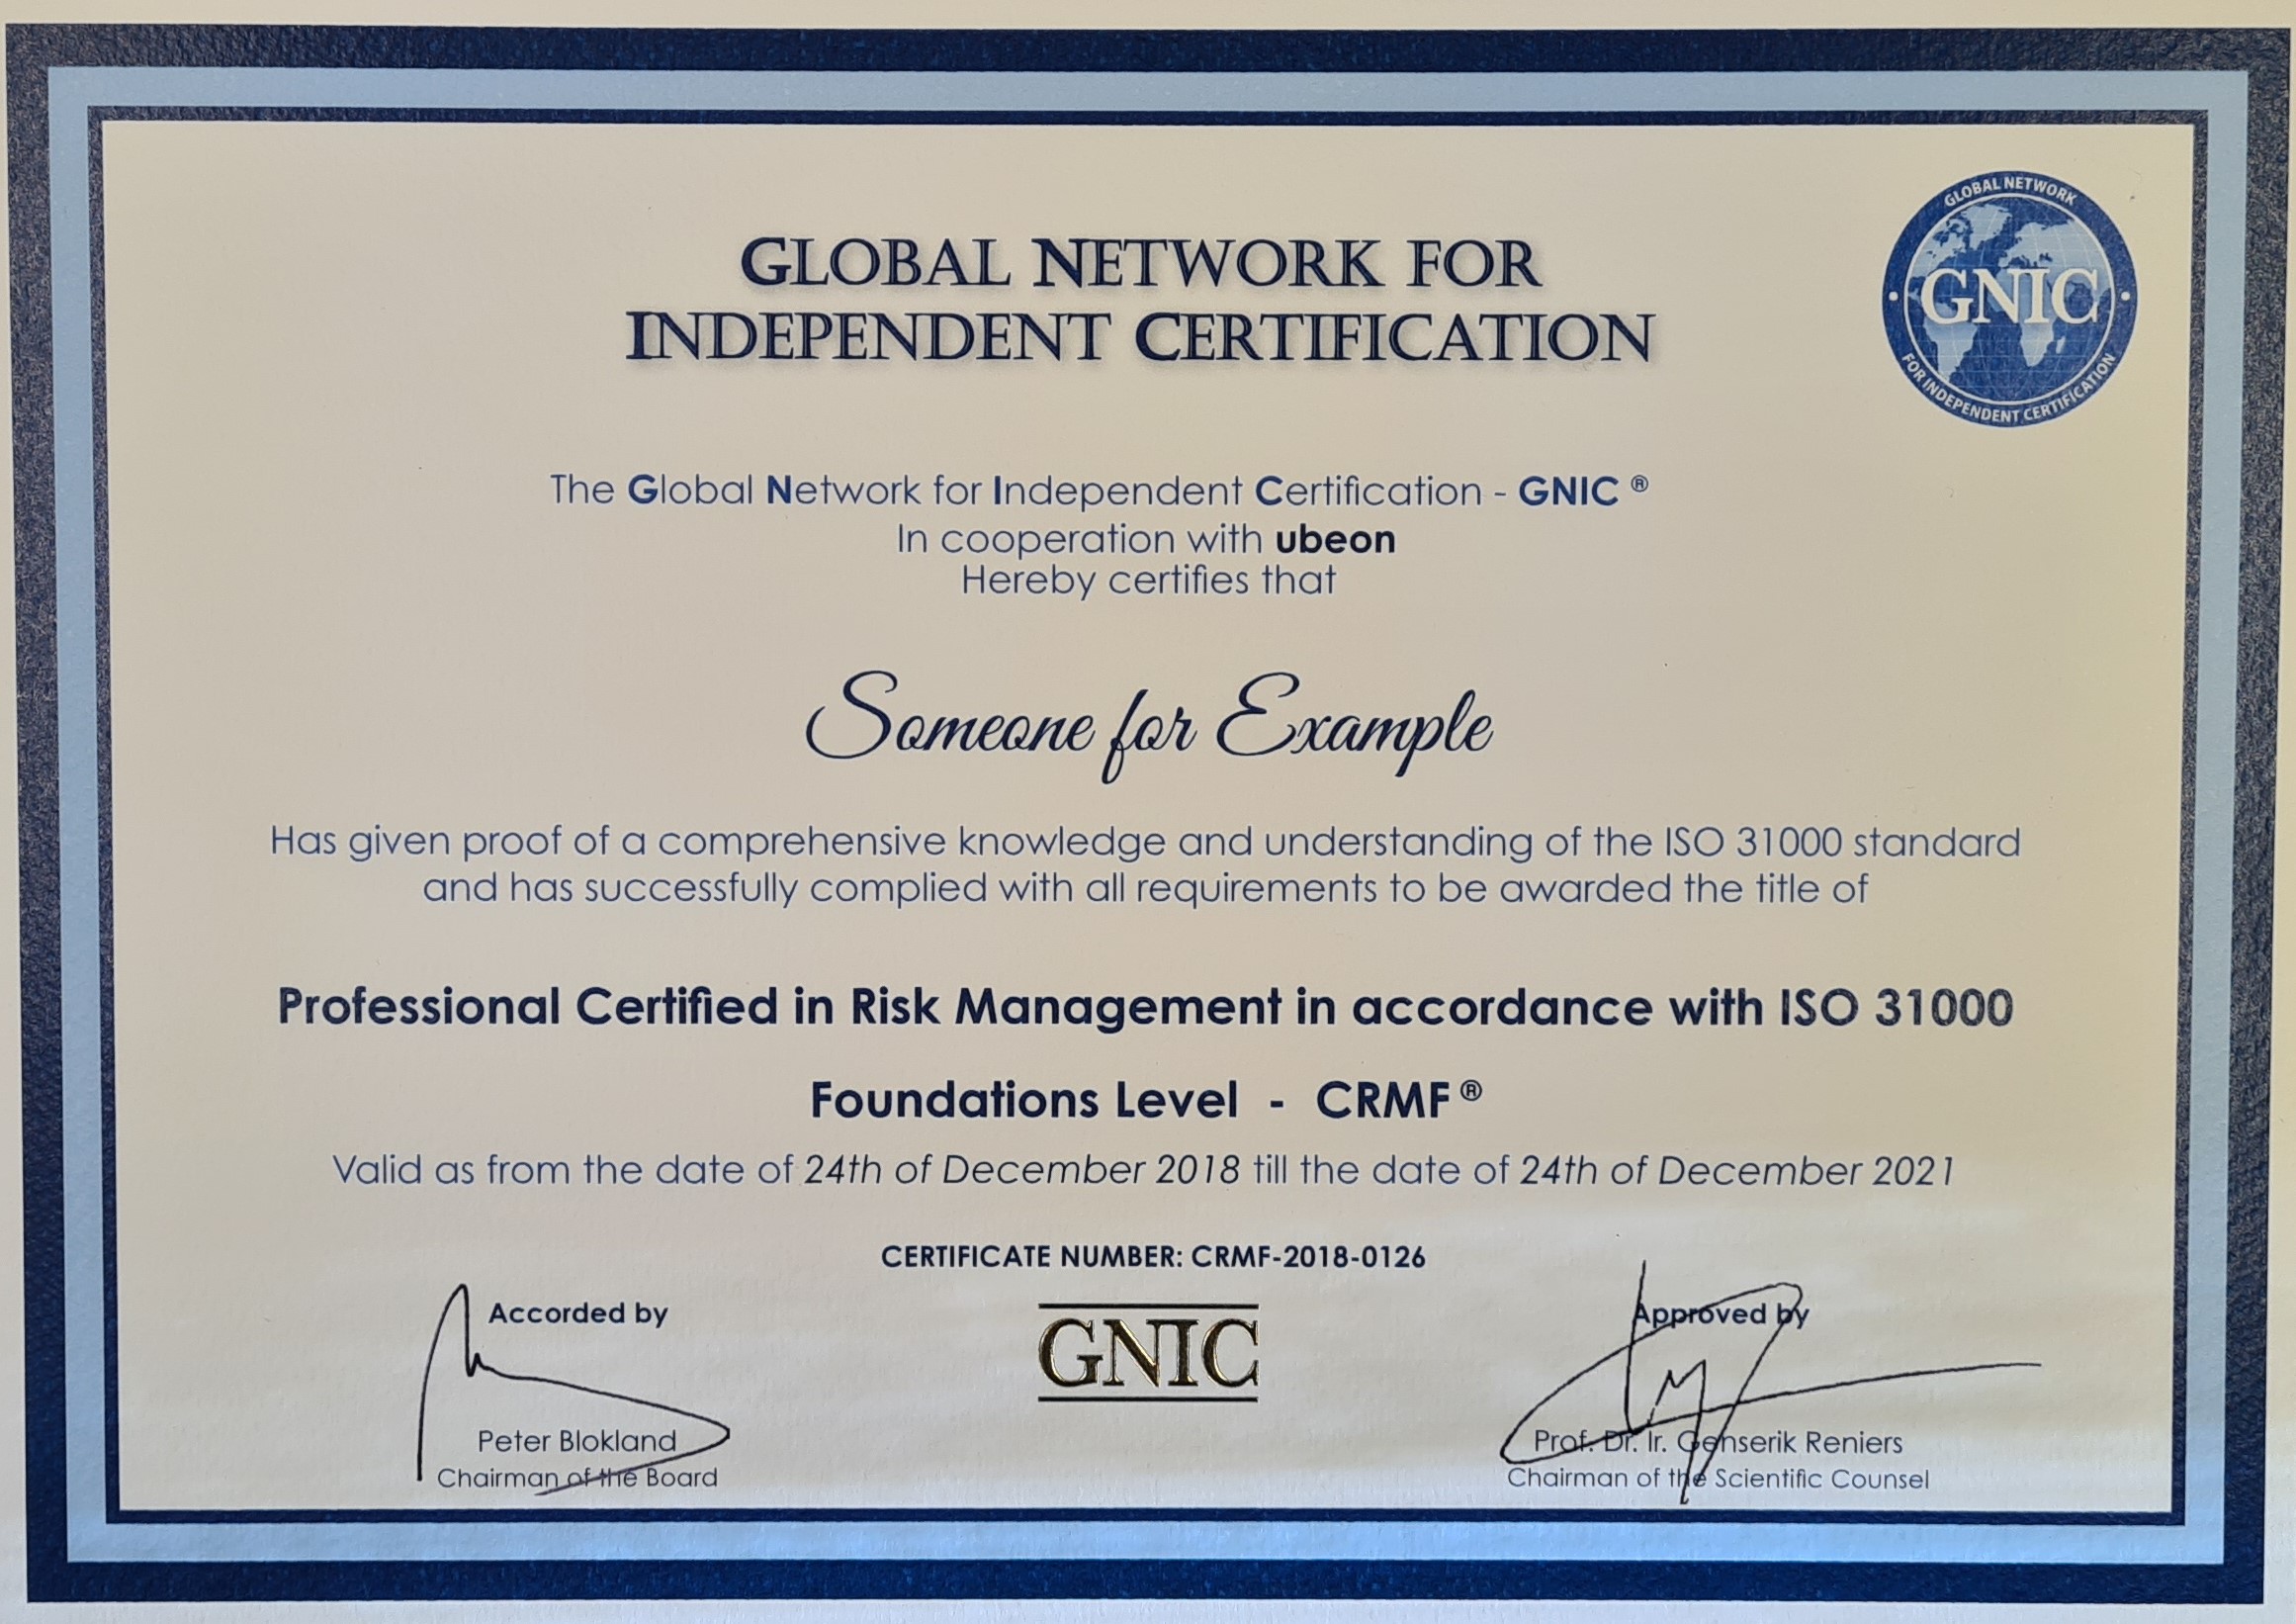 GNIC Re-certification